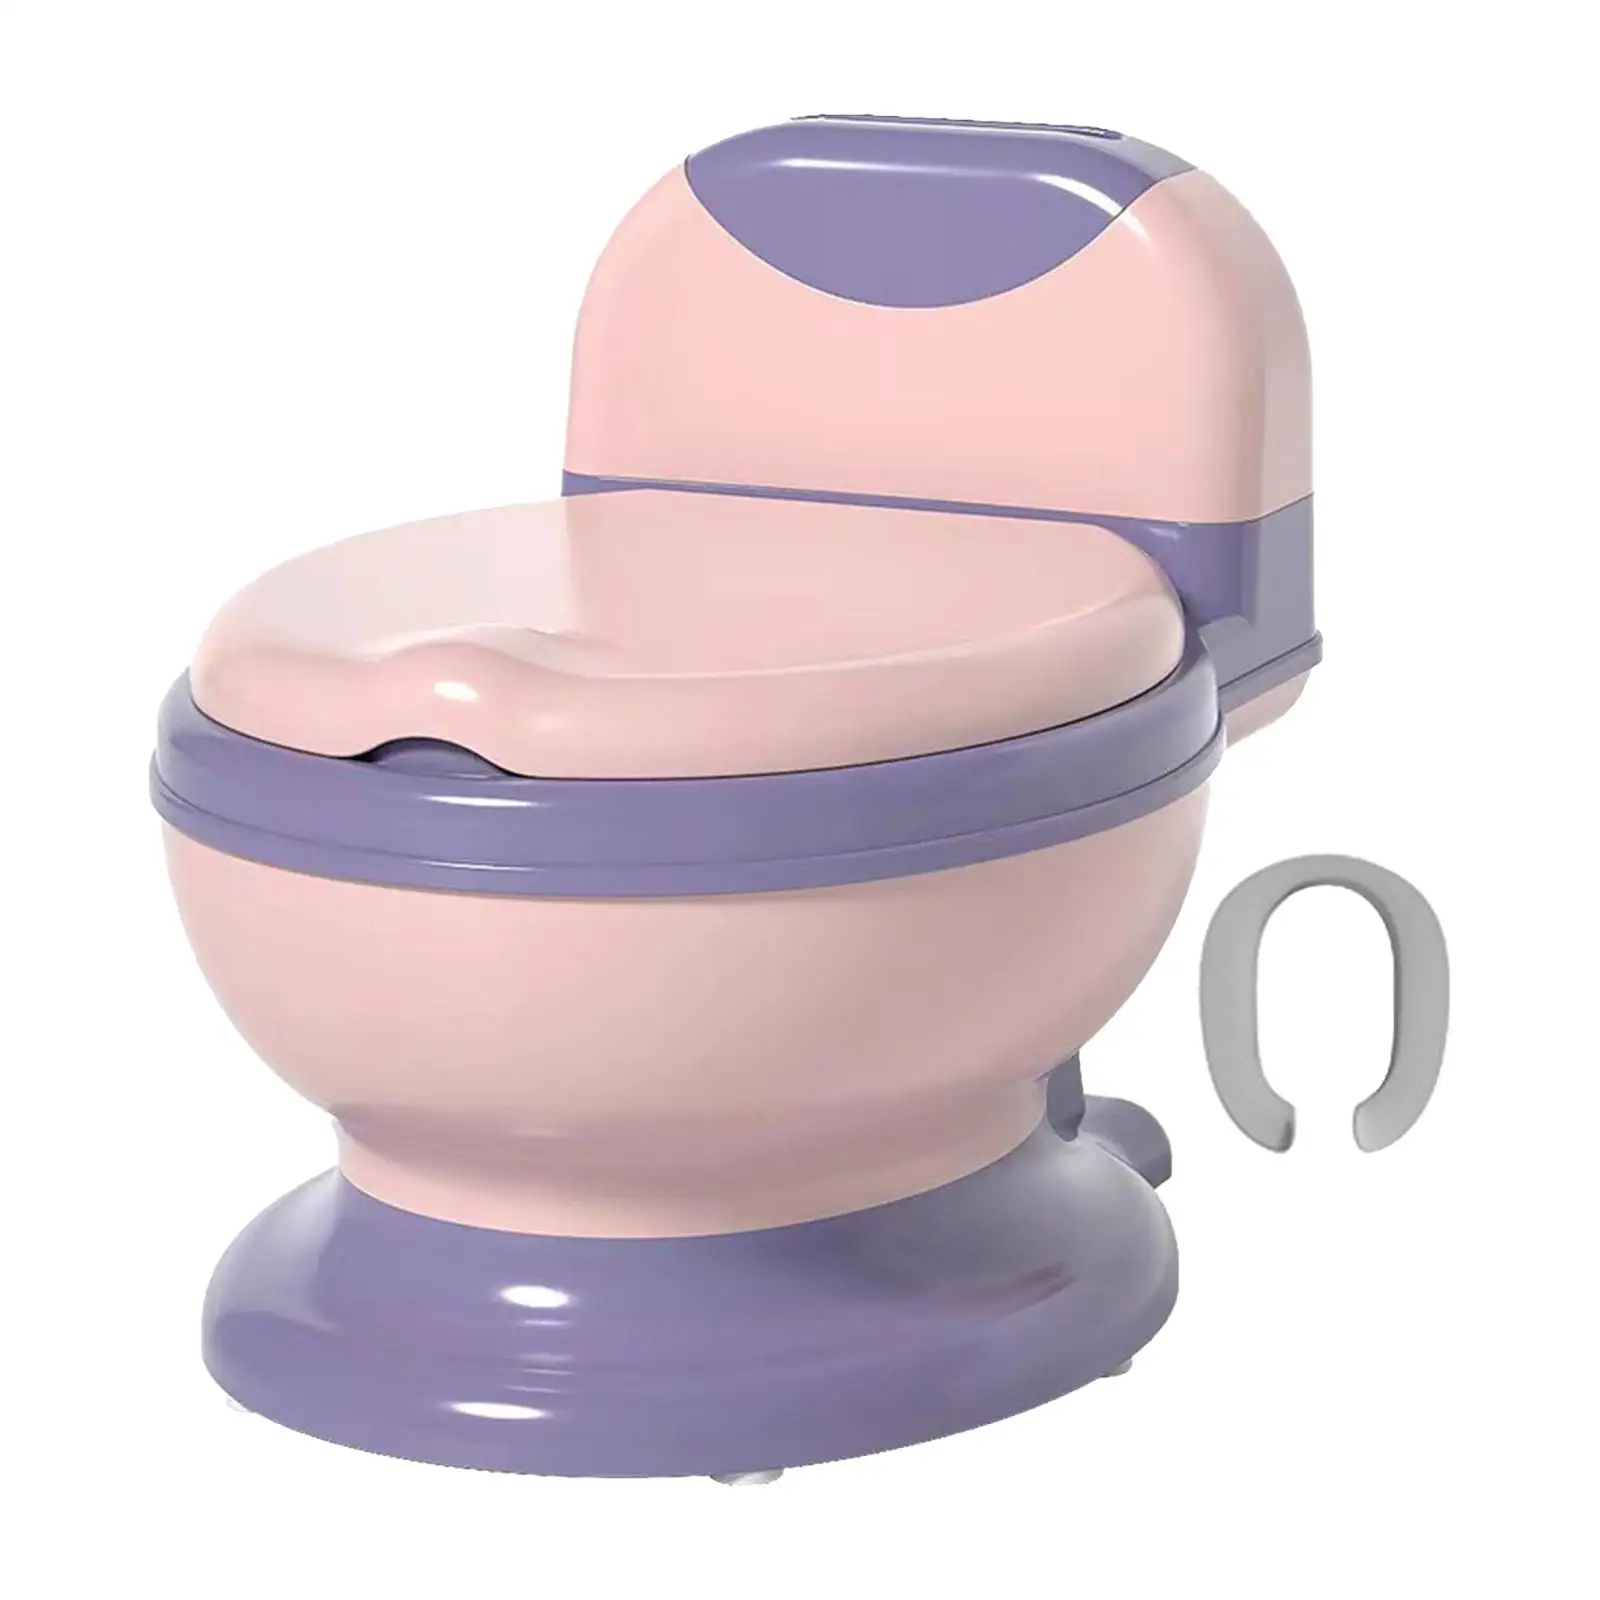 Potty Train Toilet Removable Potty Pot Portable Real Feel Potty Toddlers Potty Chair for Kids Children Toddlers Baby Girls